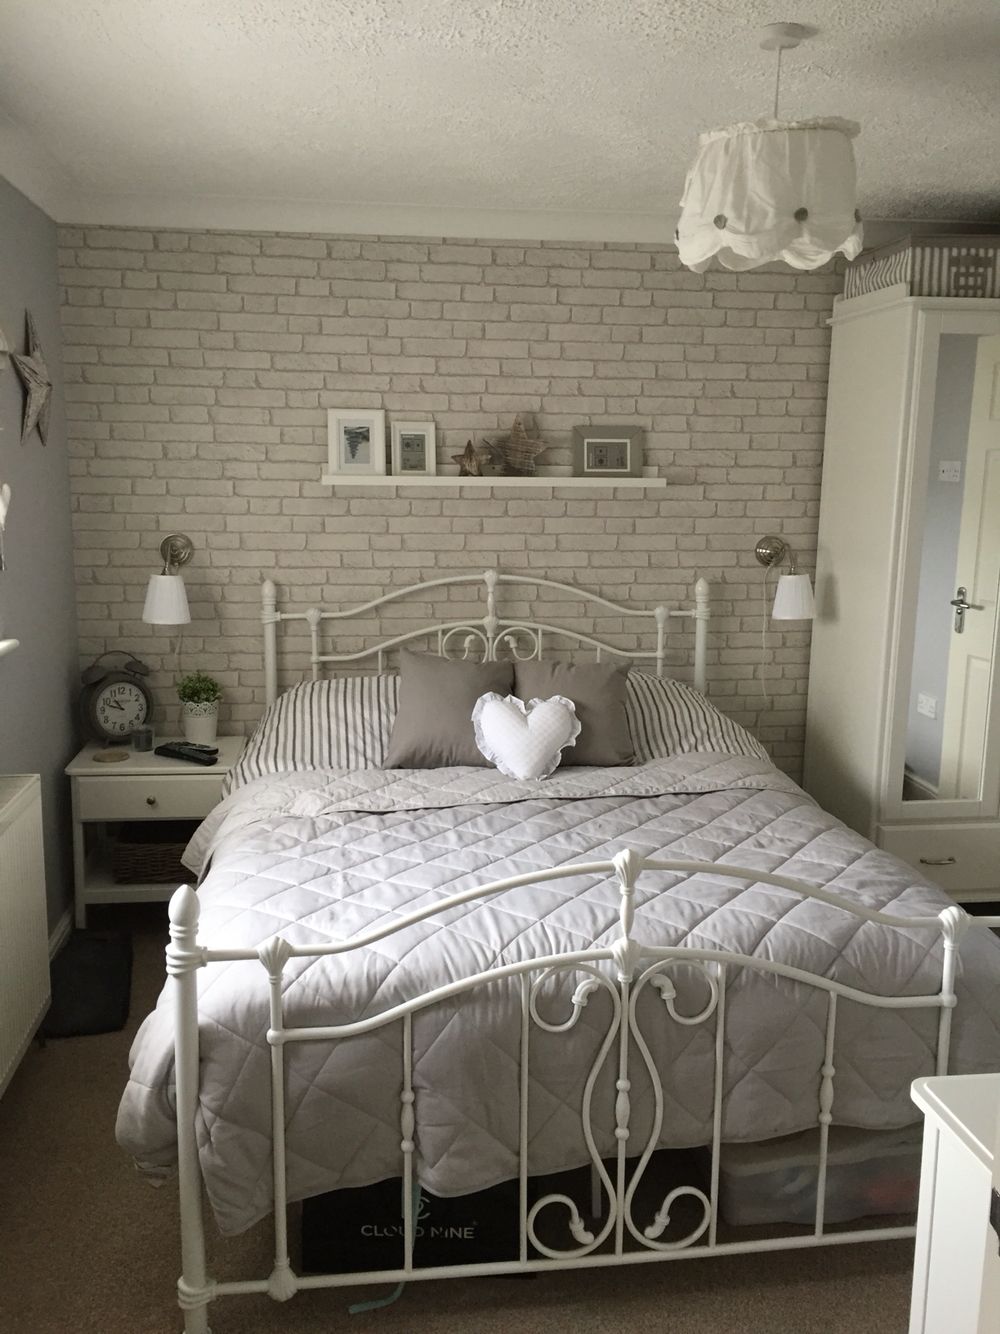 Free download Brick wallpaper Bedroom in 2019 [1000x1334] for your